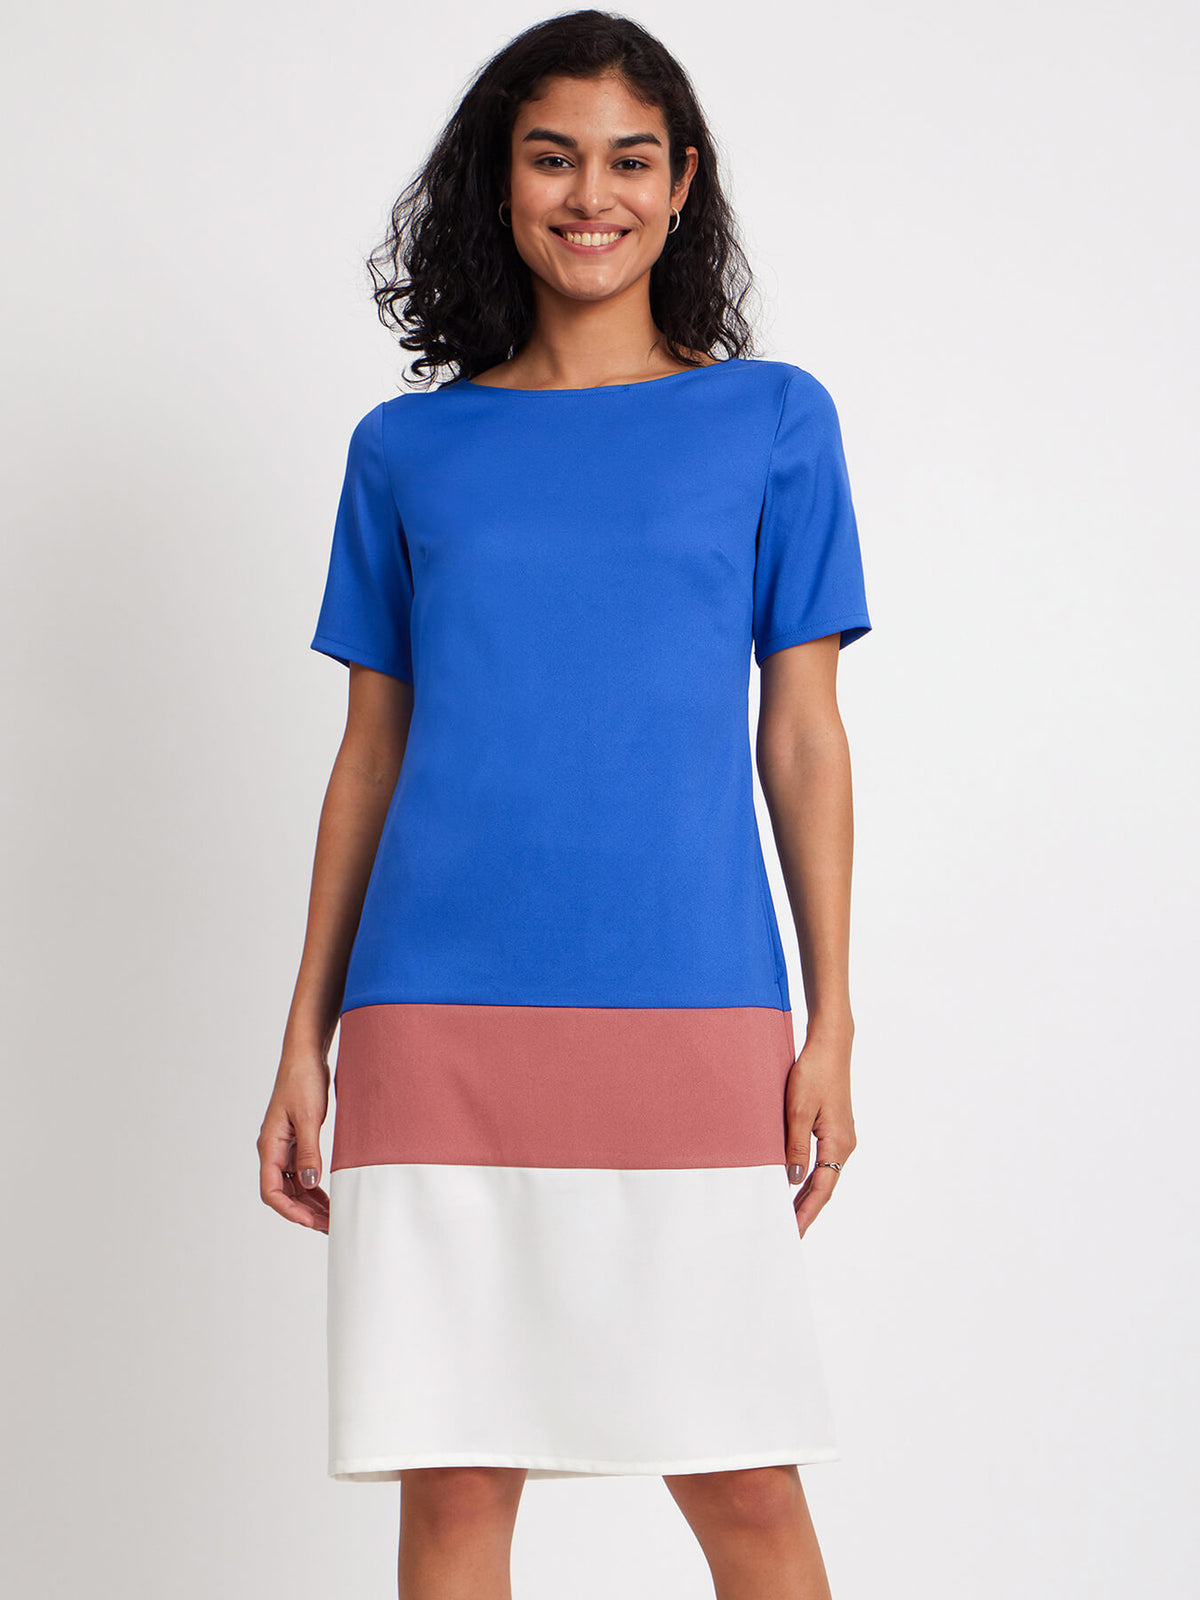 Colour Block Boat Neck Dress - Blue And White